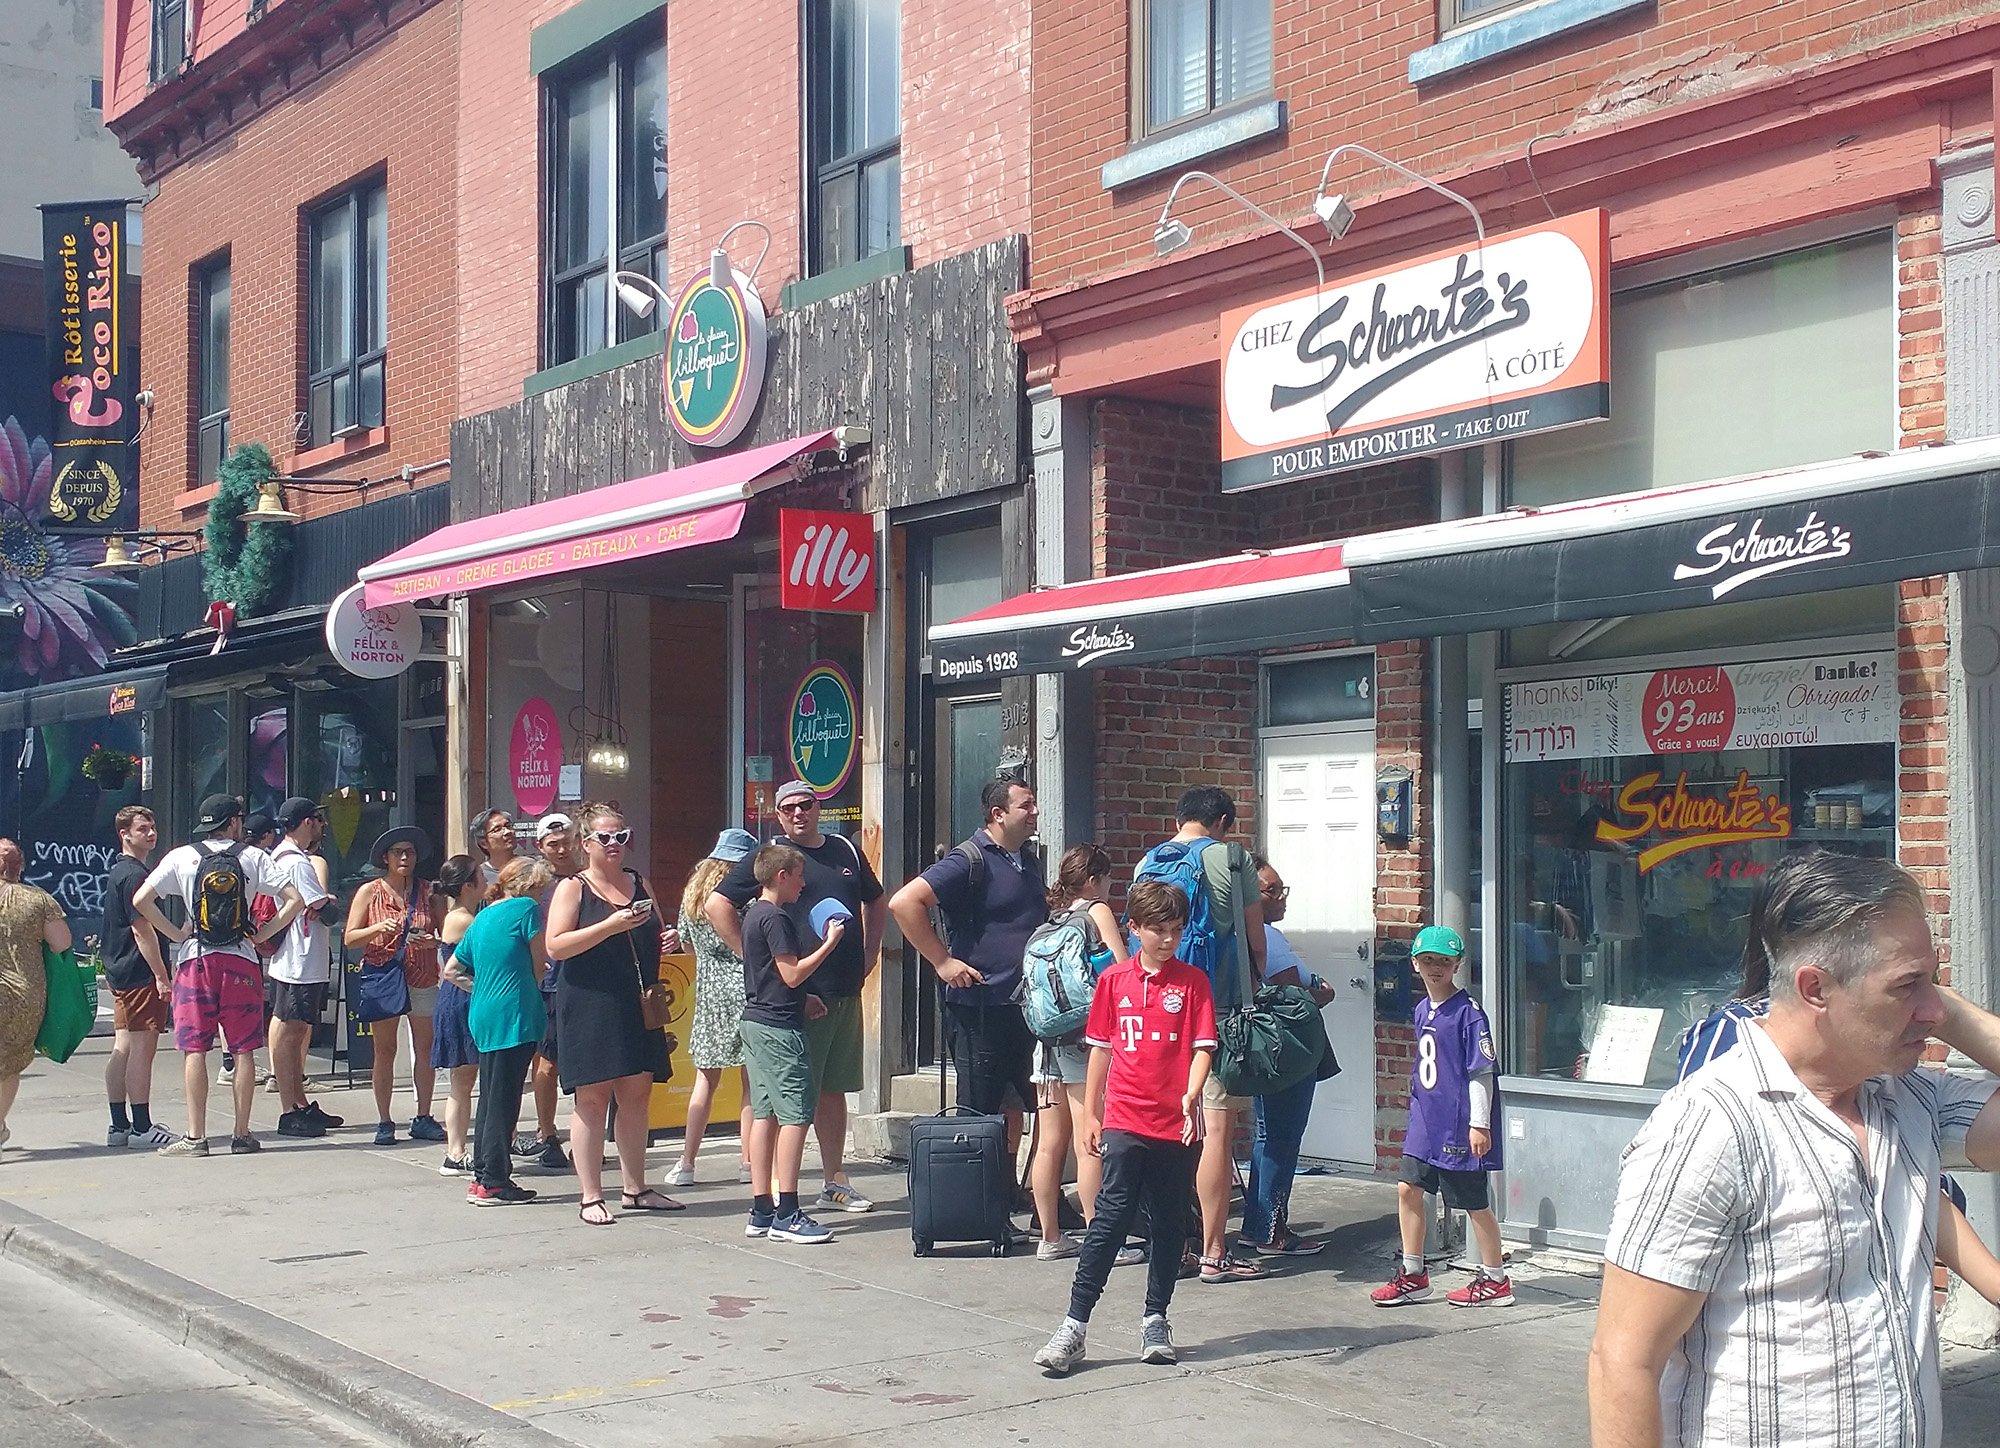 If you come to Montreal you have to try Schwartz's smoked meat sandwiches. There's always a line, but...